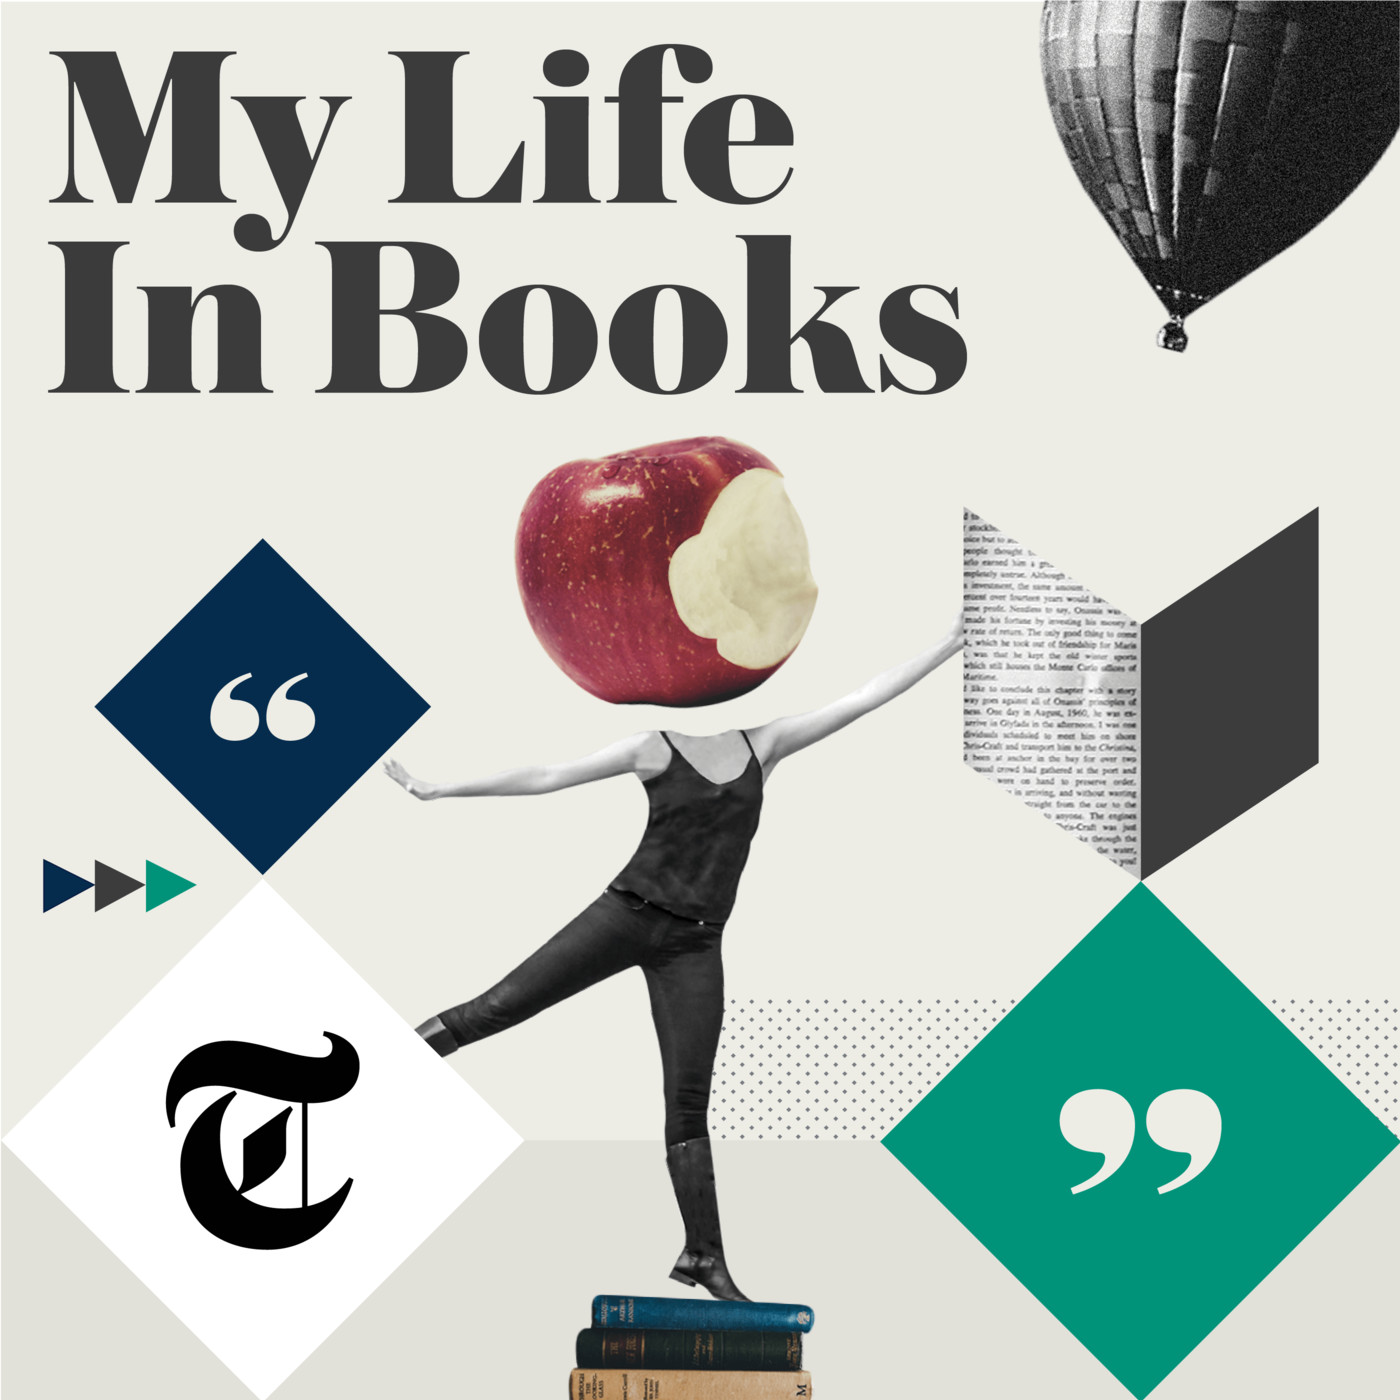 Books in my life. My Life book. Картинки book my Life. The book in Life.